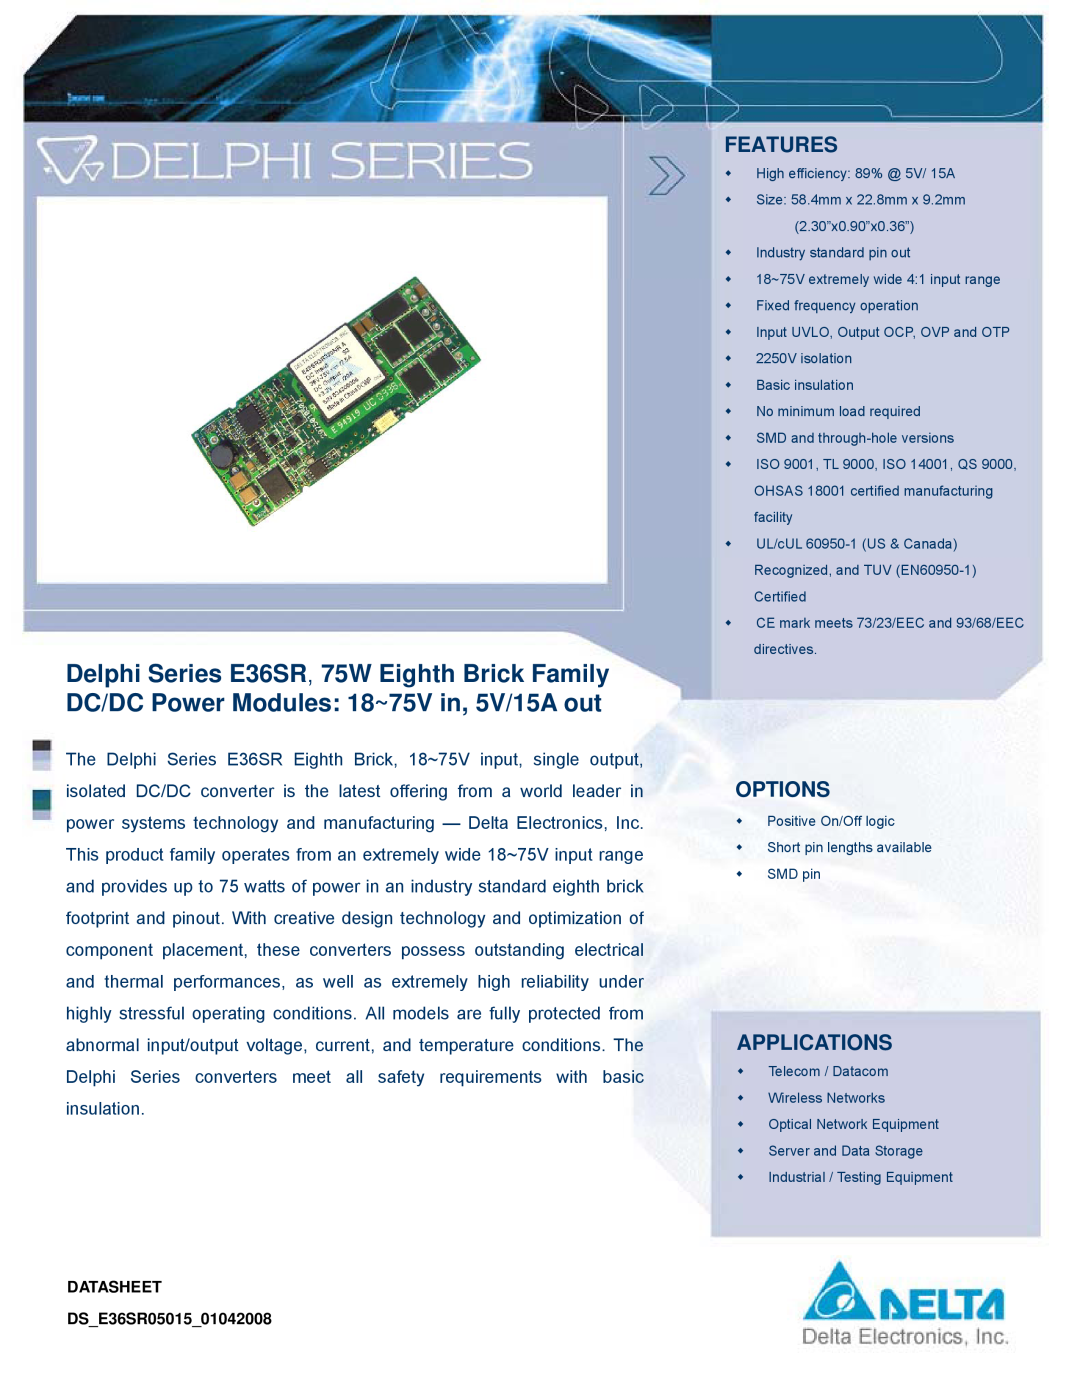 Delta Electronics manual Delphi Series E36SR, 75W Eighth Brick Family, DC/DC Power Modules 18~75V in, 5V/15A out 